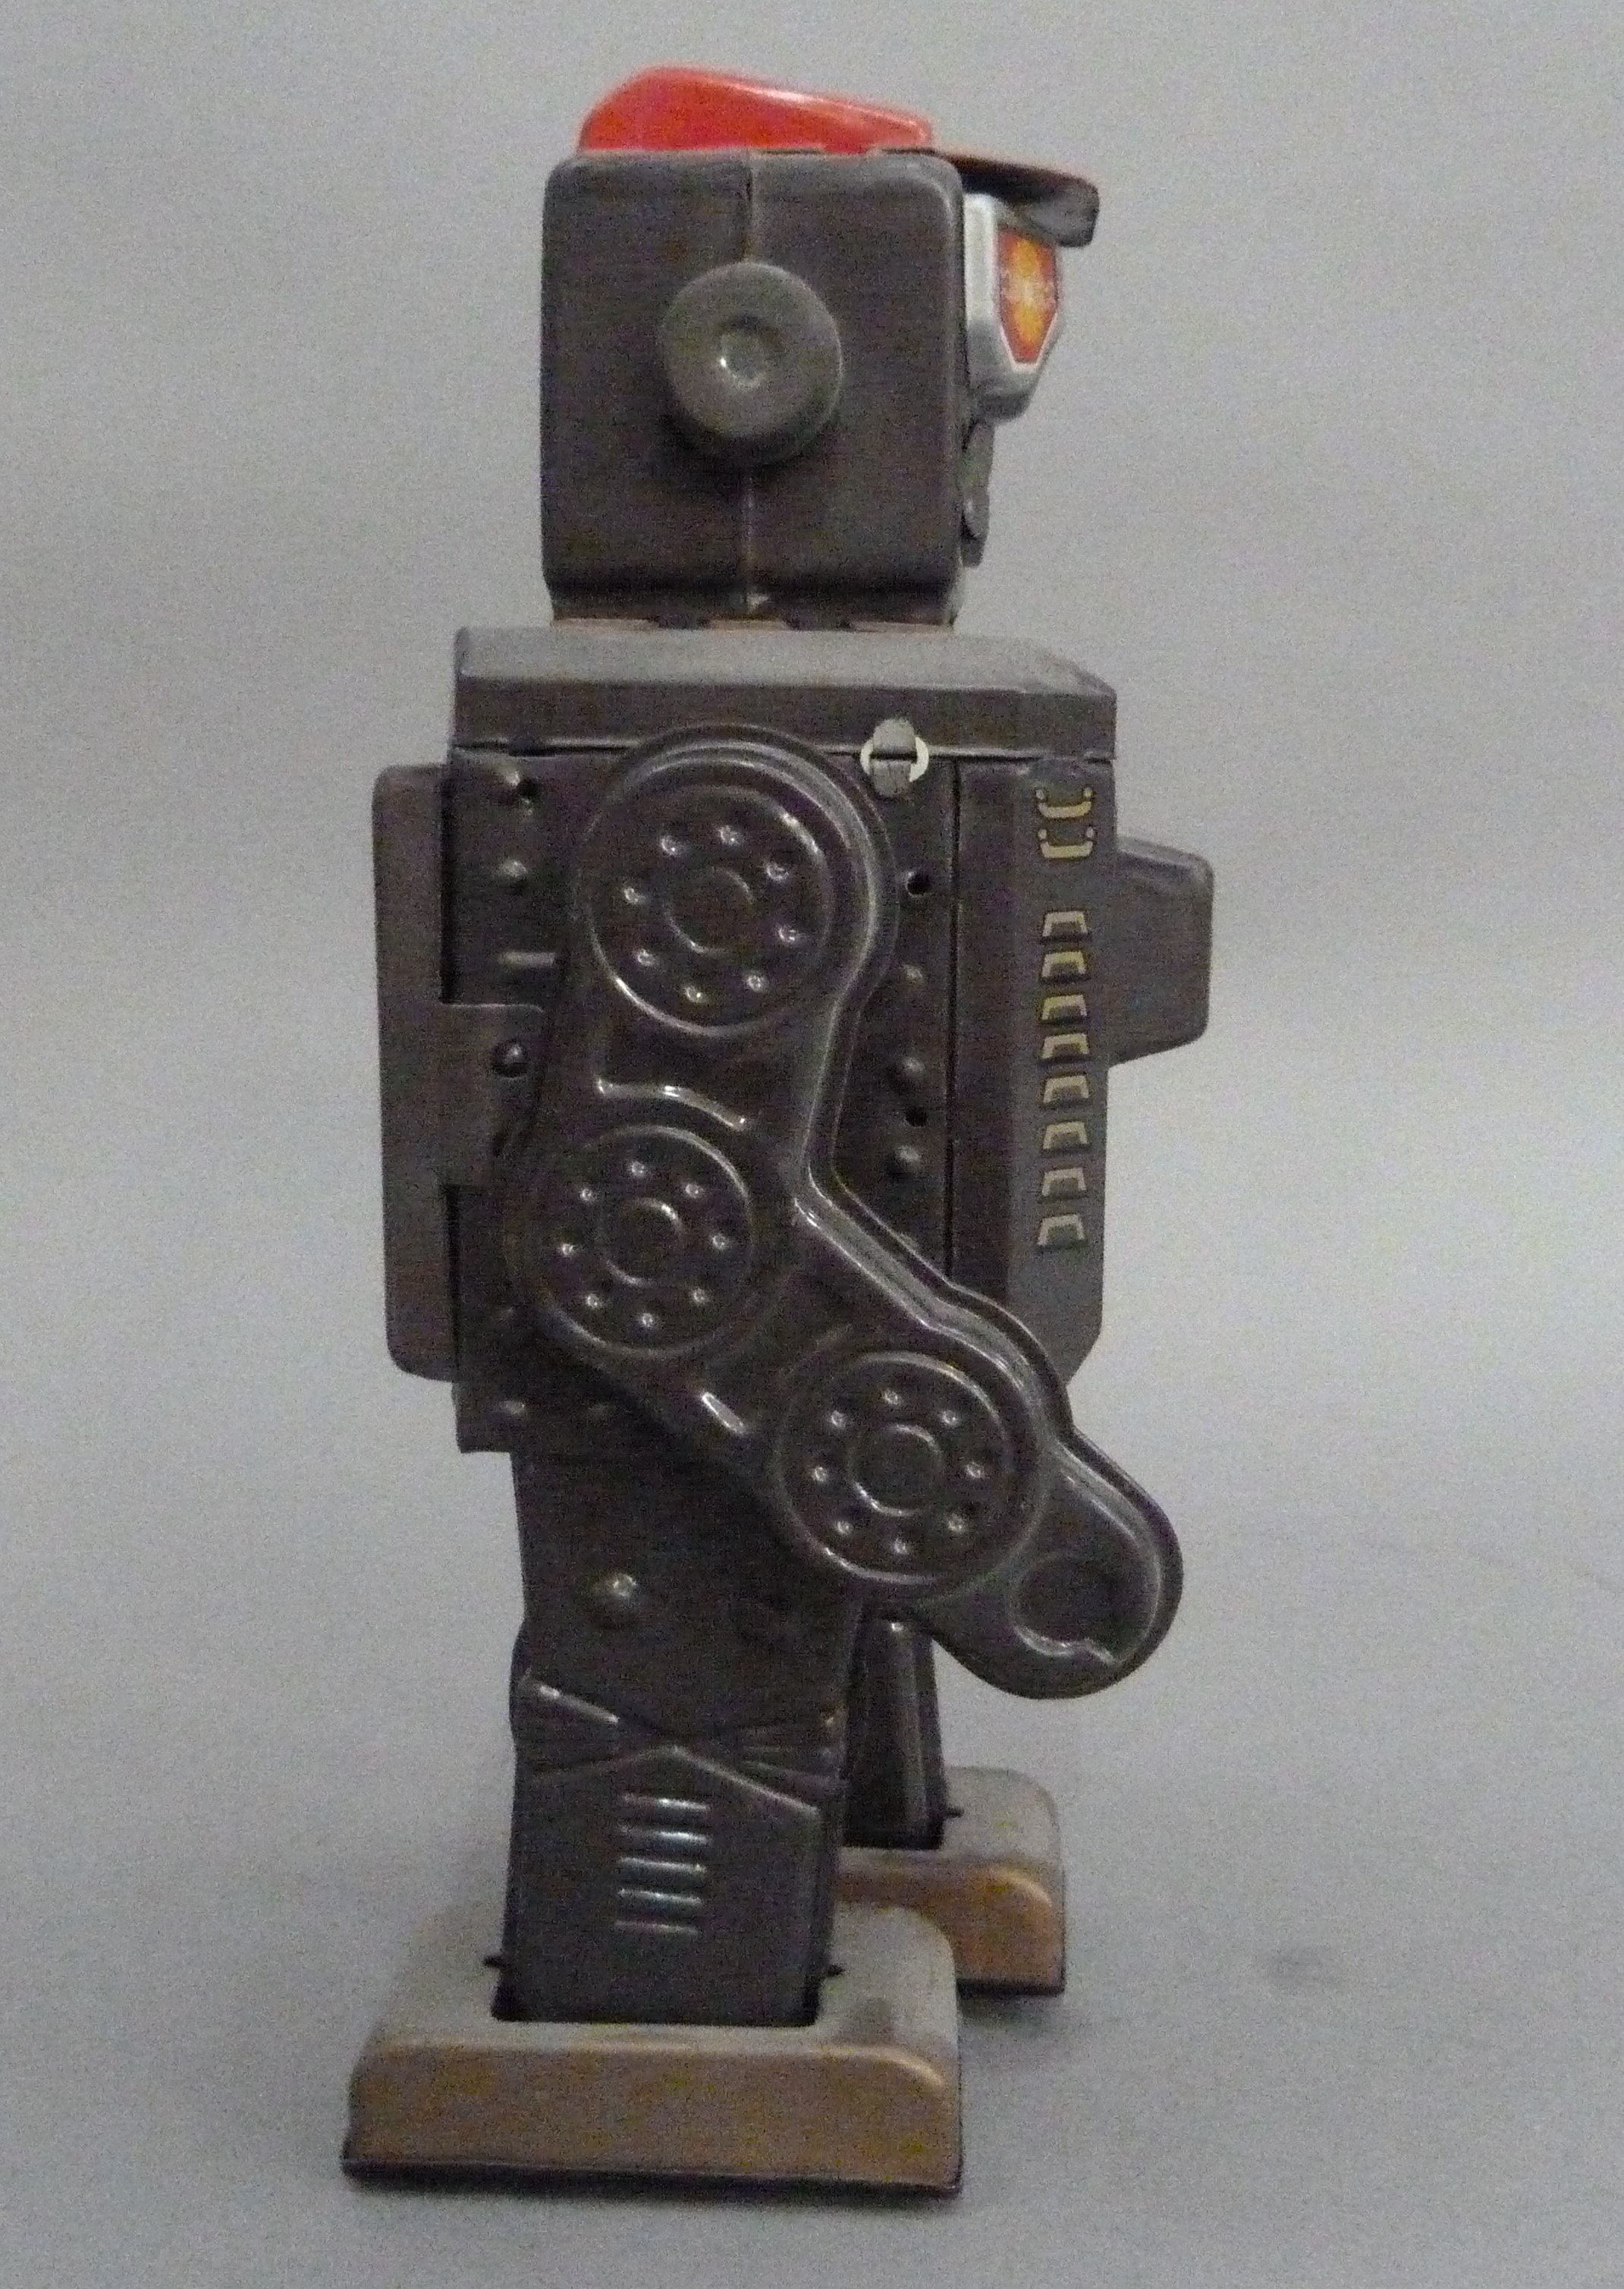 Horiwaka (Japan) Attacking Martian battery operated tin plate robot, 22cm high - Image 2 of 4